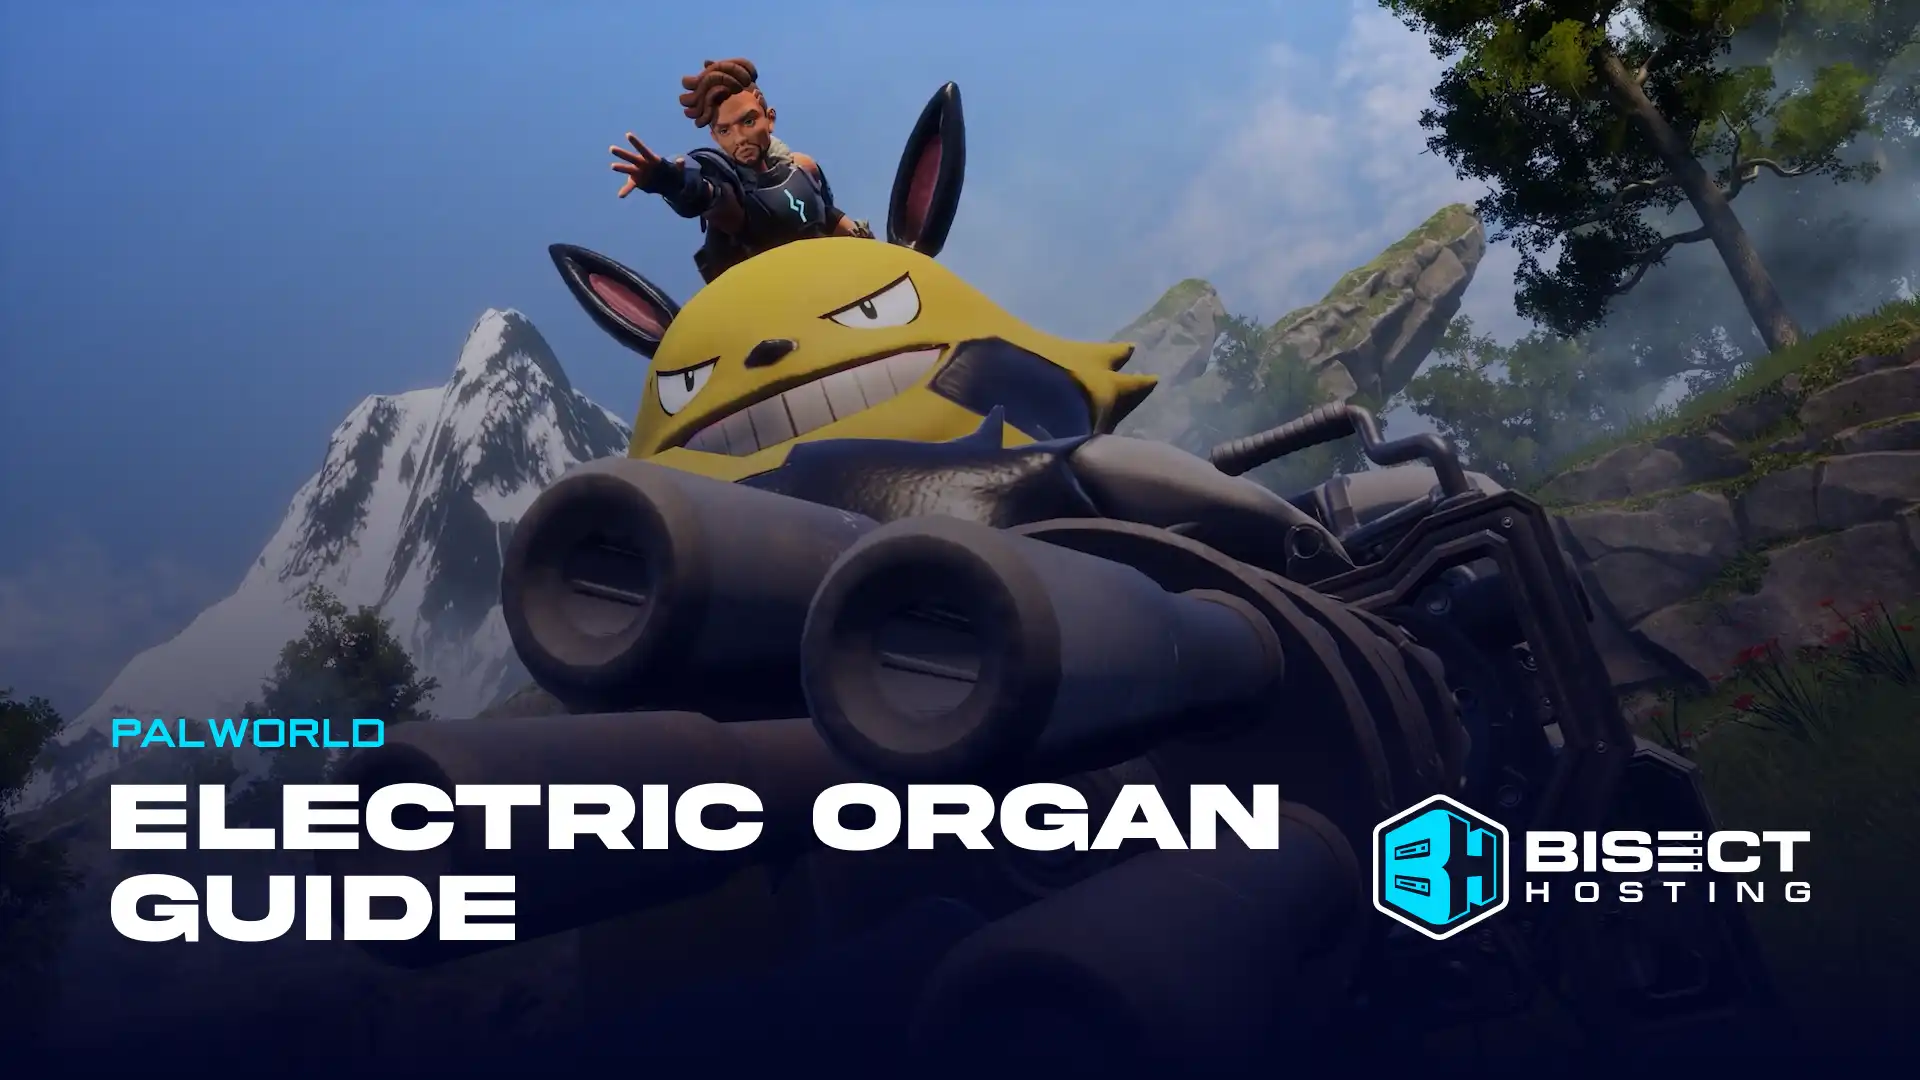 Palworld Electric Organ Farm Guide: Best Locations, Pals, & All Crafting Recipes